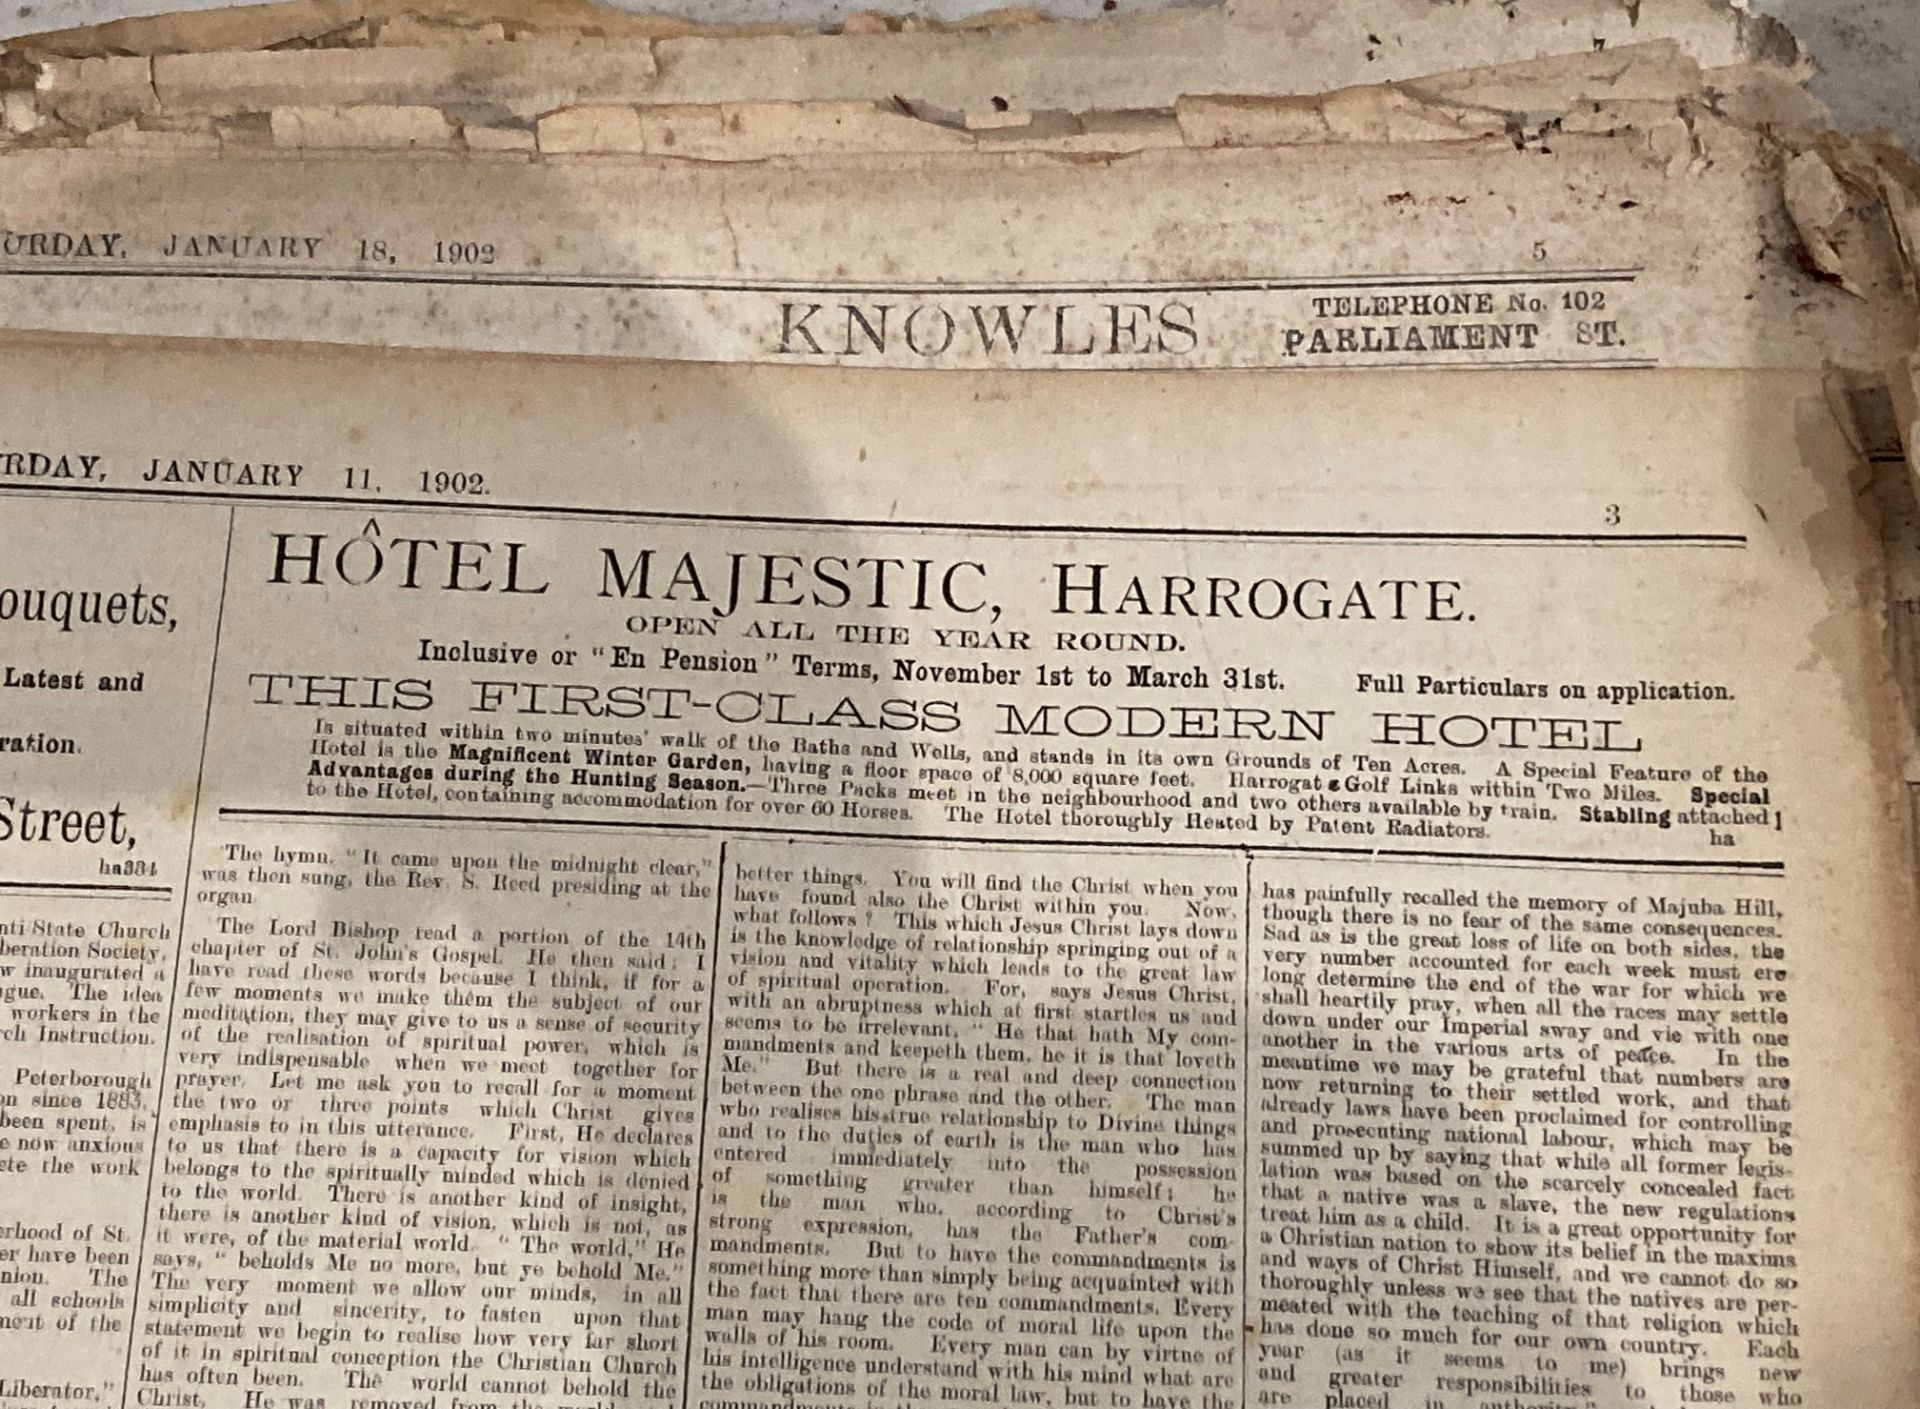 The Harrogate Advertiser and List of Visitors 66th Year of Publication - Sat Jan 4th 1902 - price - Image 5 of 11